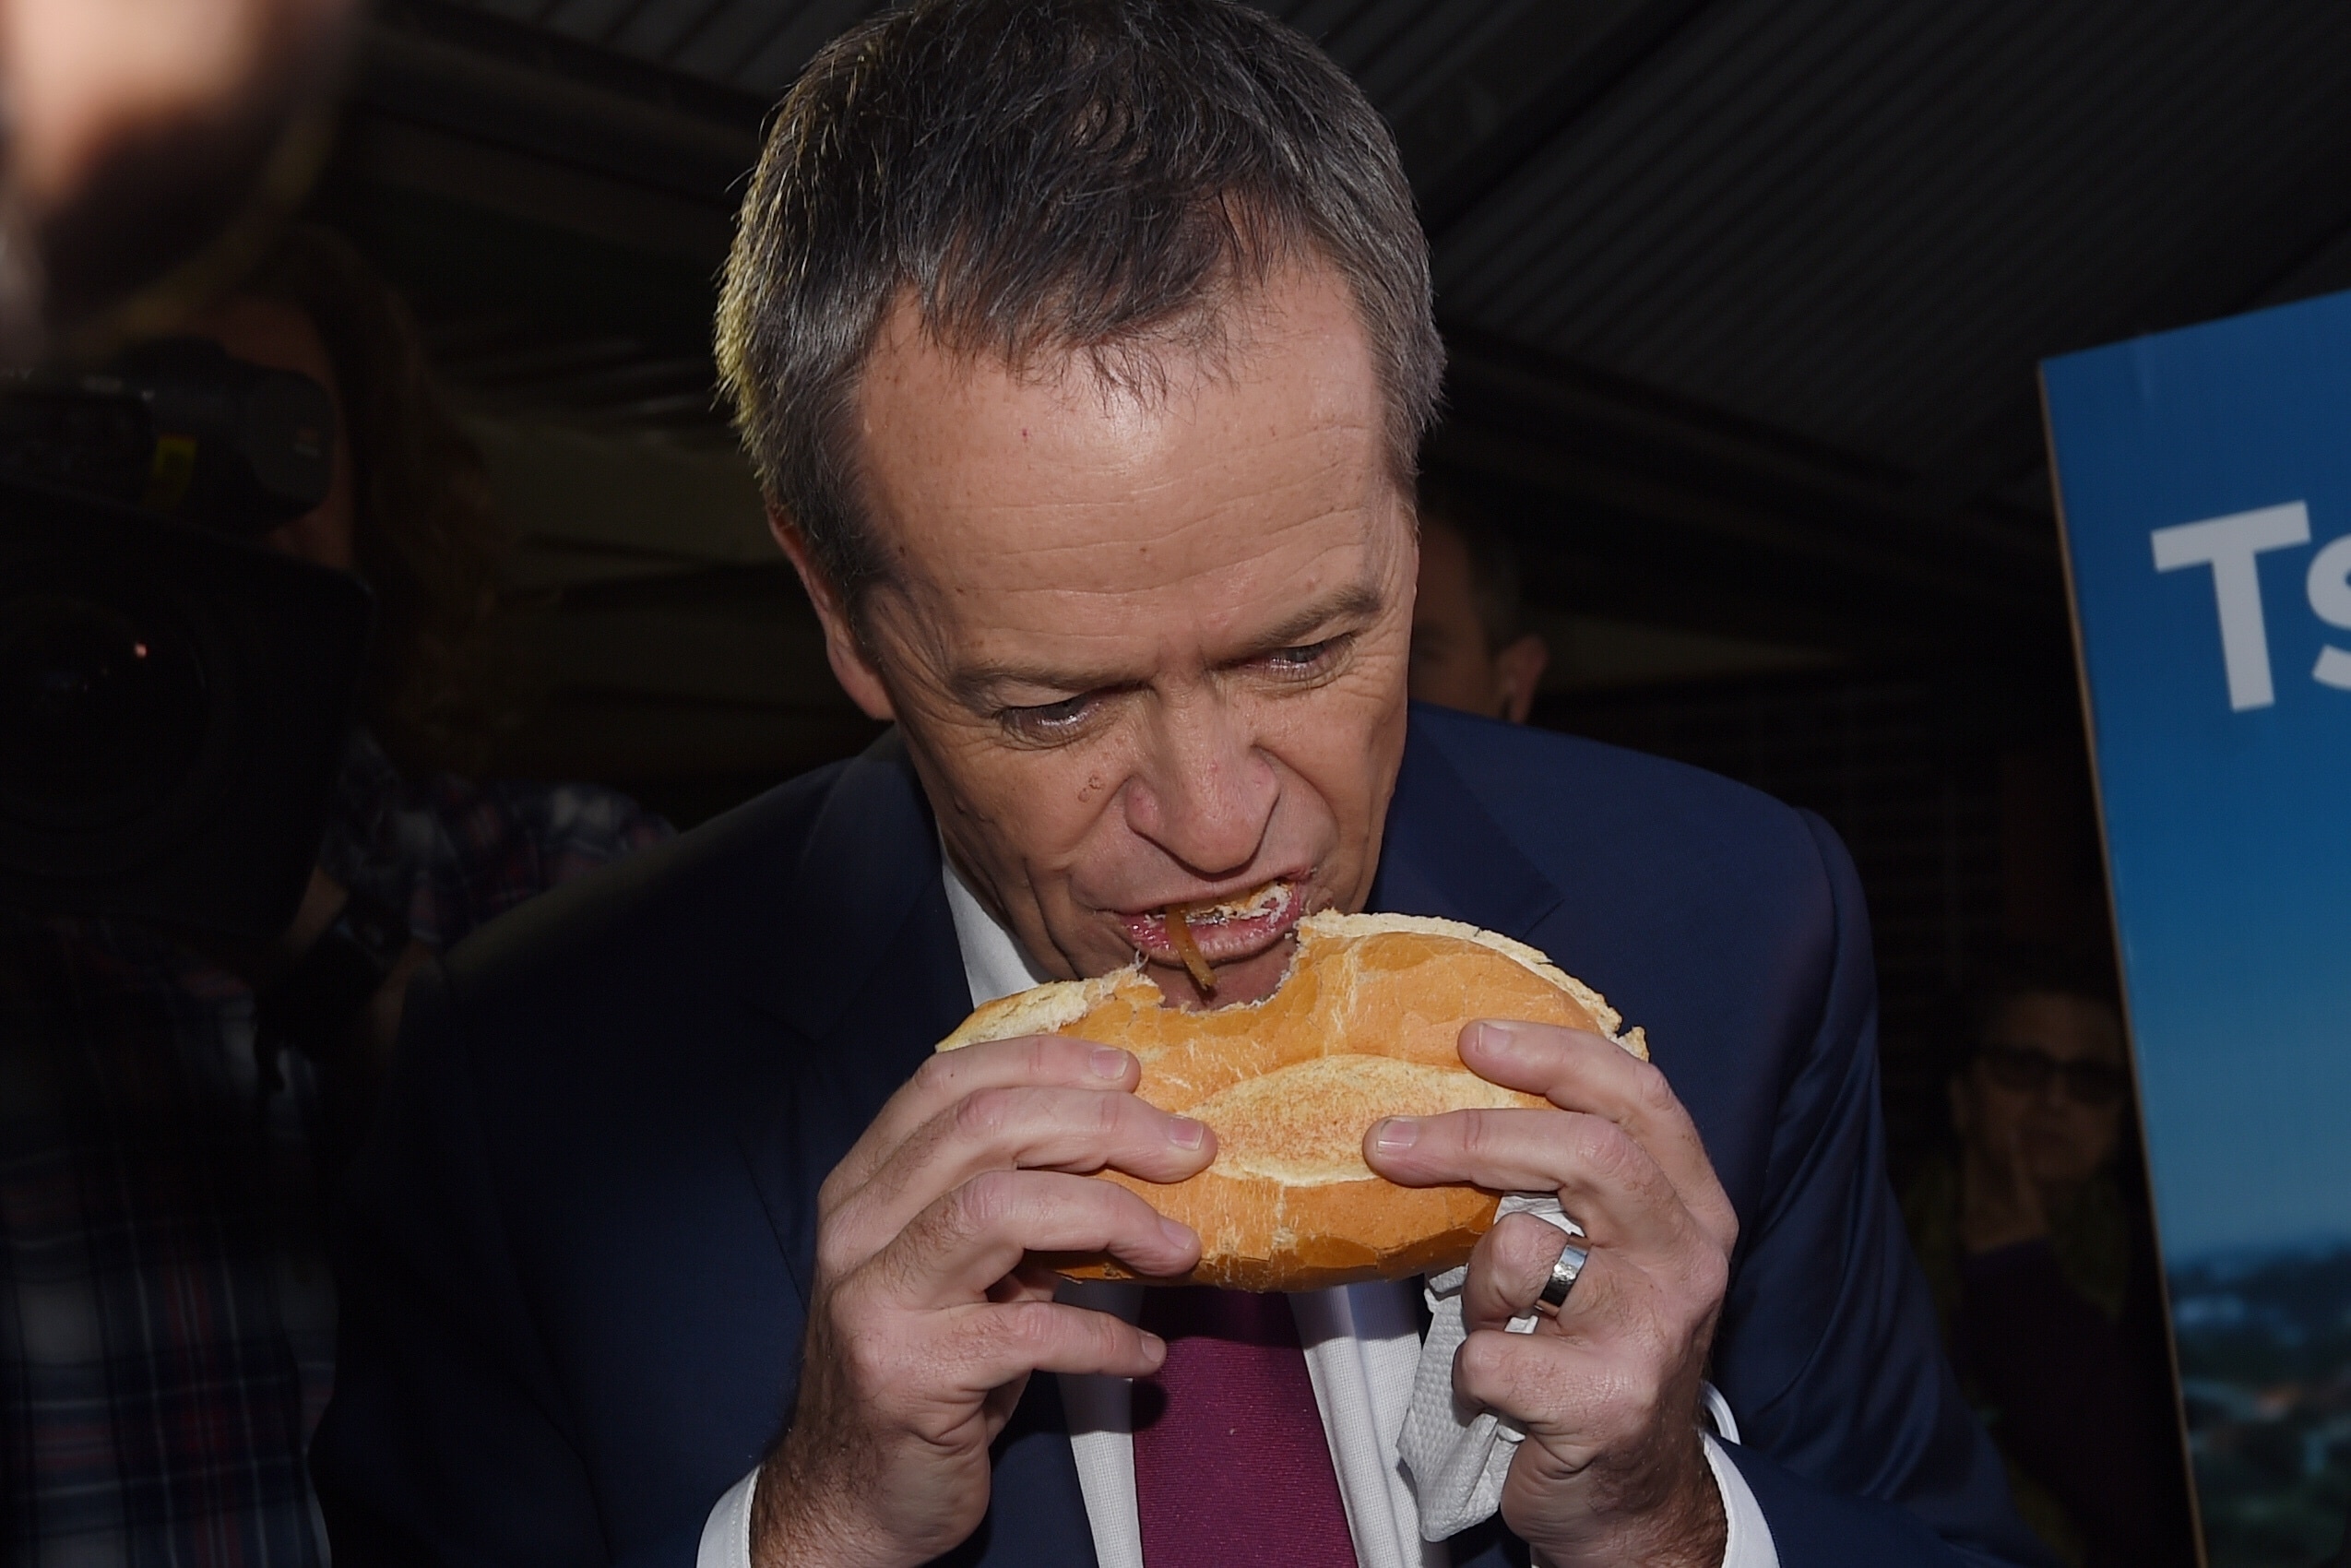 Then-Labor leader Bill Shorten eating a sausage in a roll at a Sydney polling booth on election day in 2016.